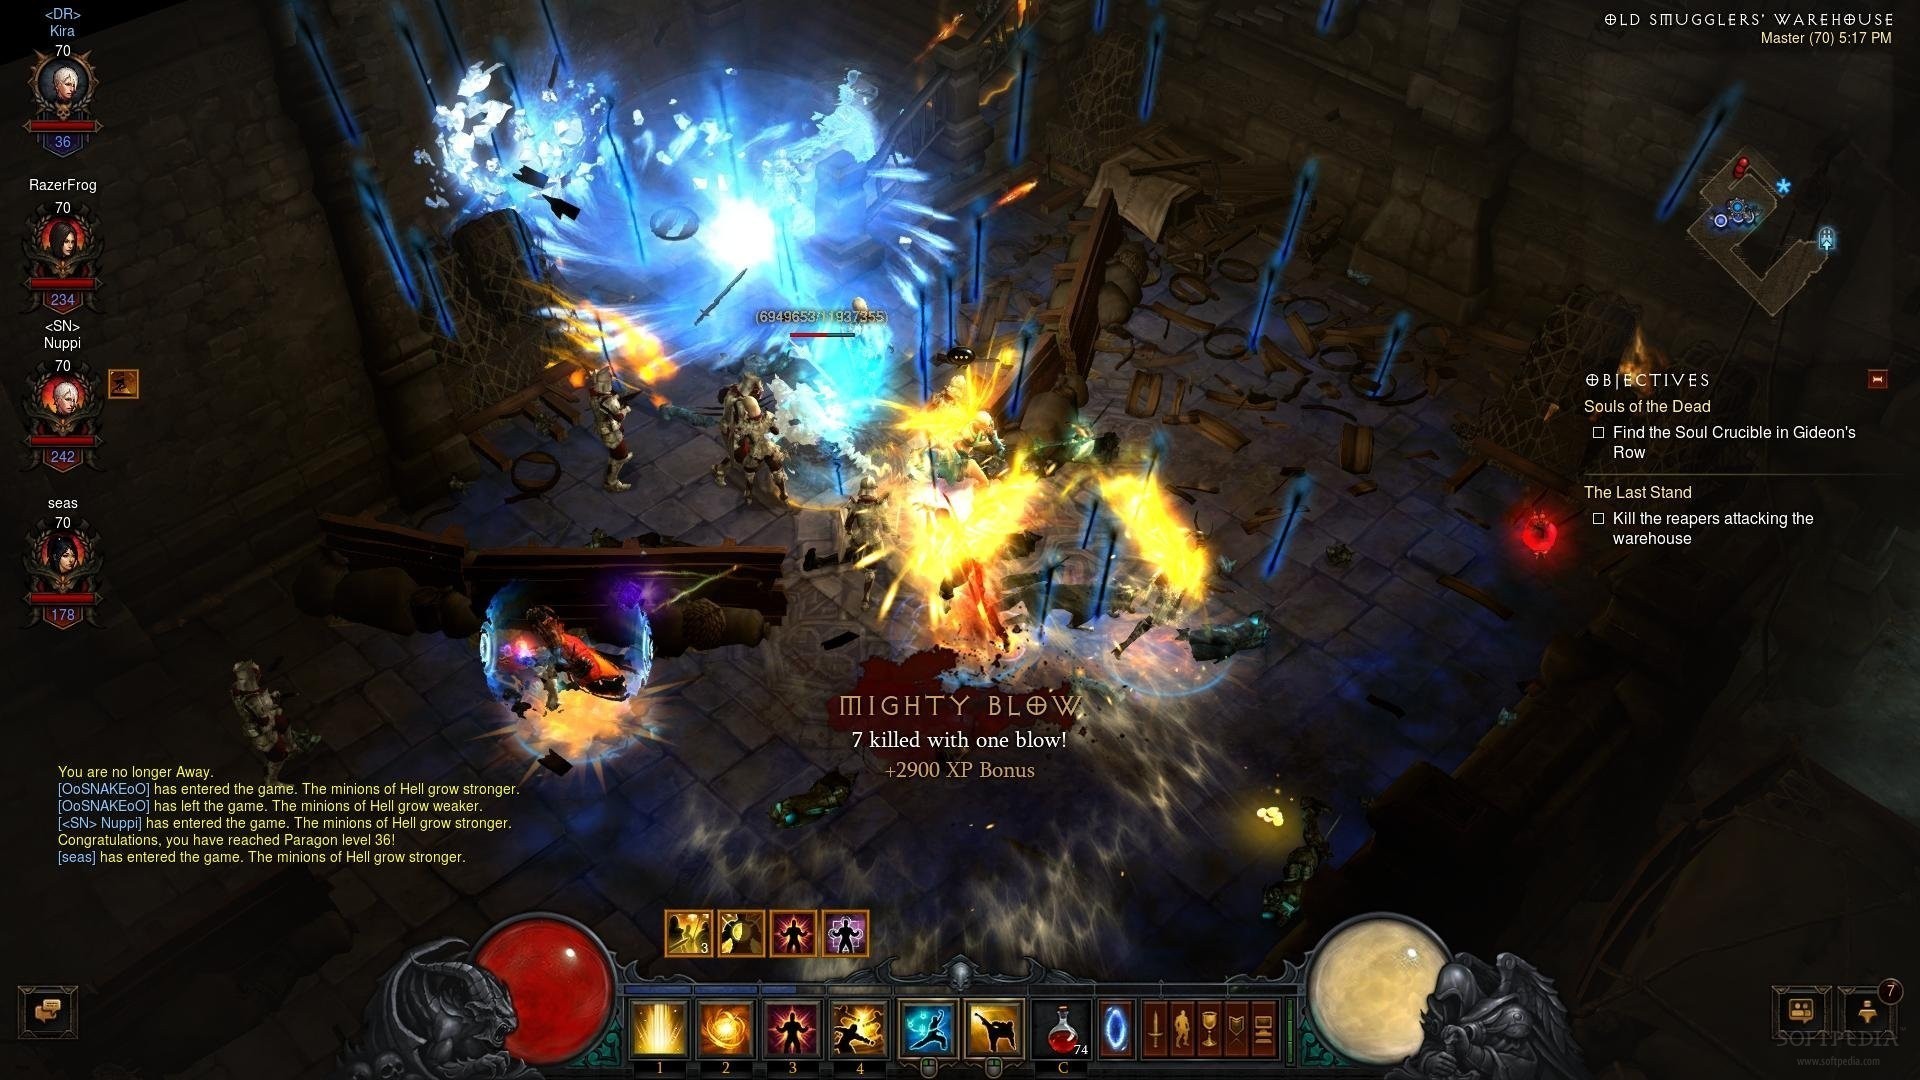 how to view leaderboards diablo 3